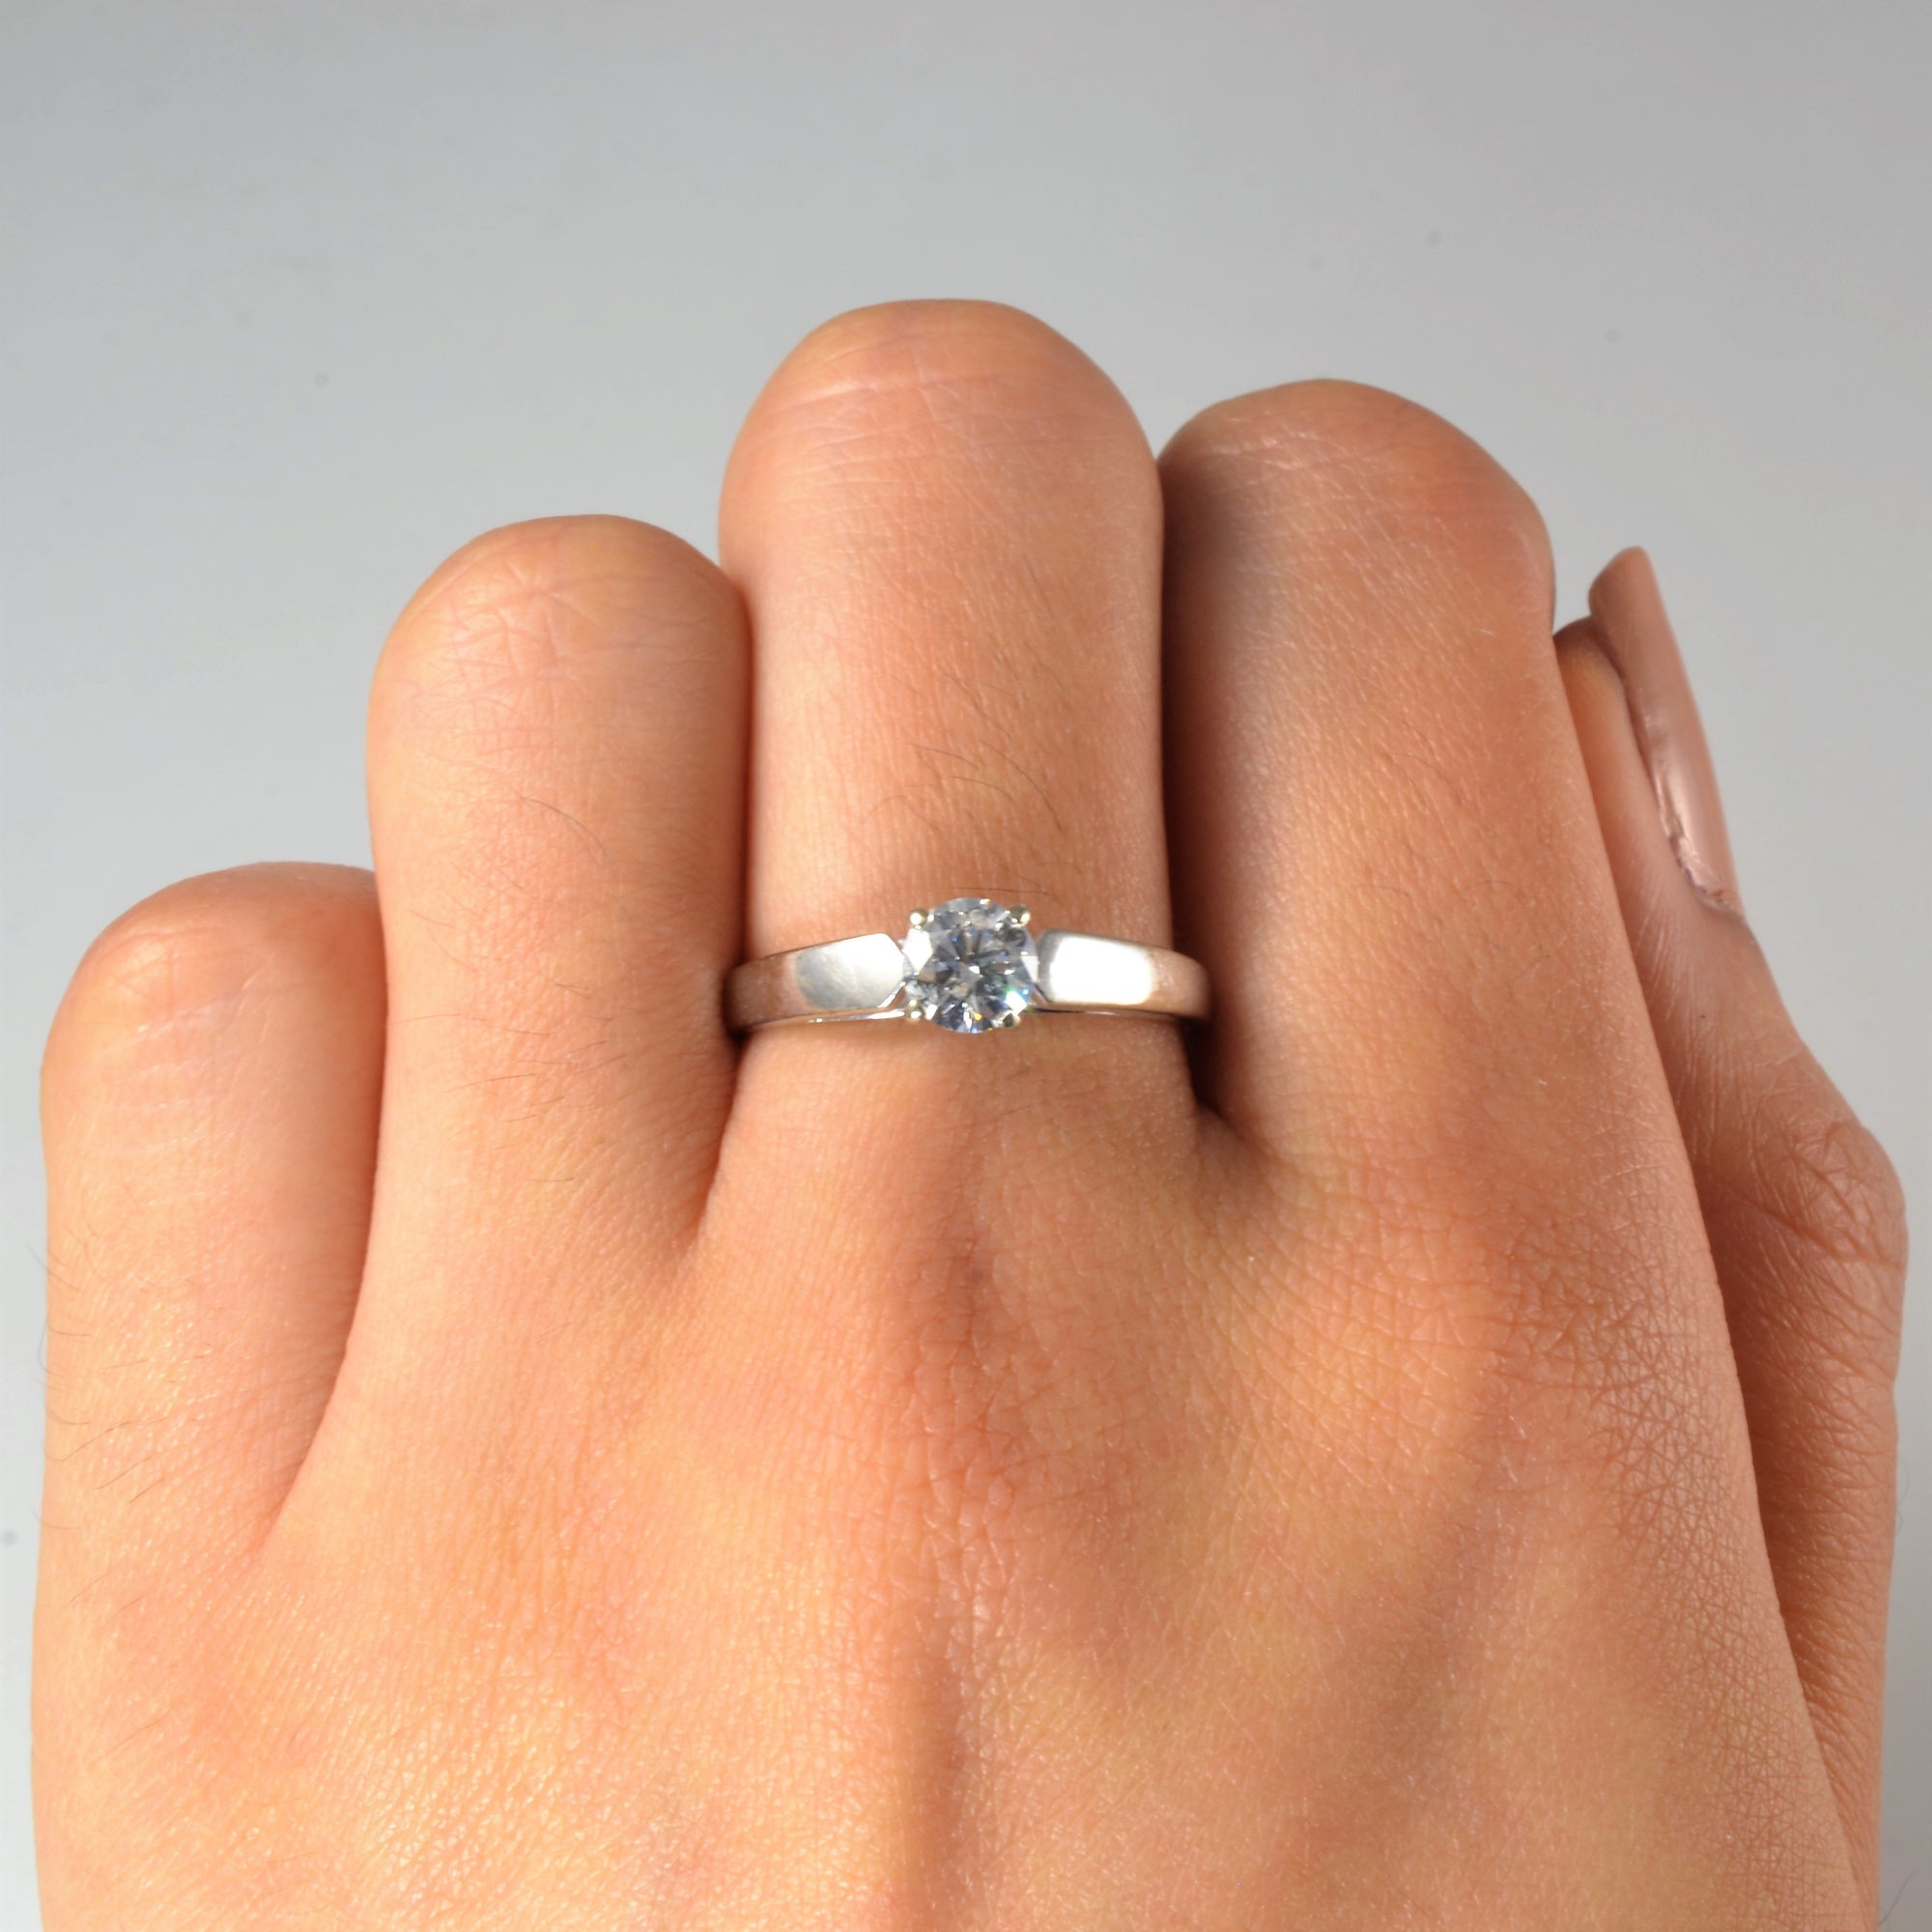 Tapered Solitaire Diamond Ring | 0.54ct | SZ 7.5 |